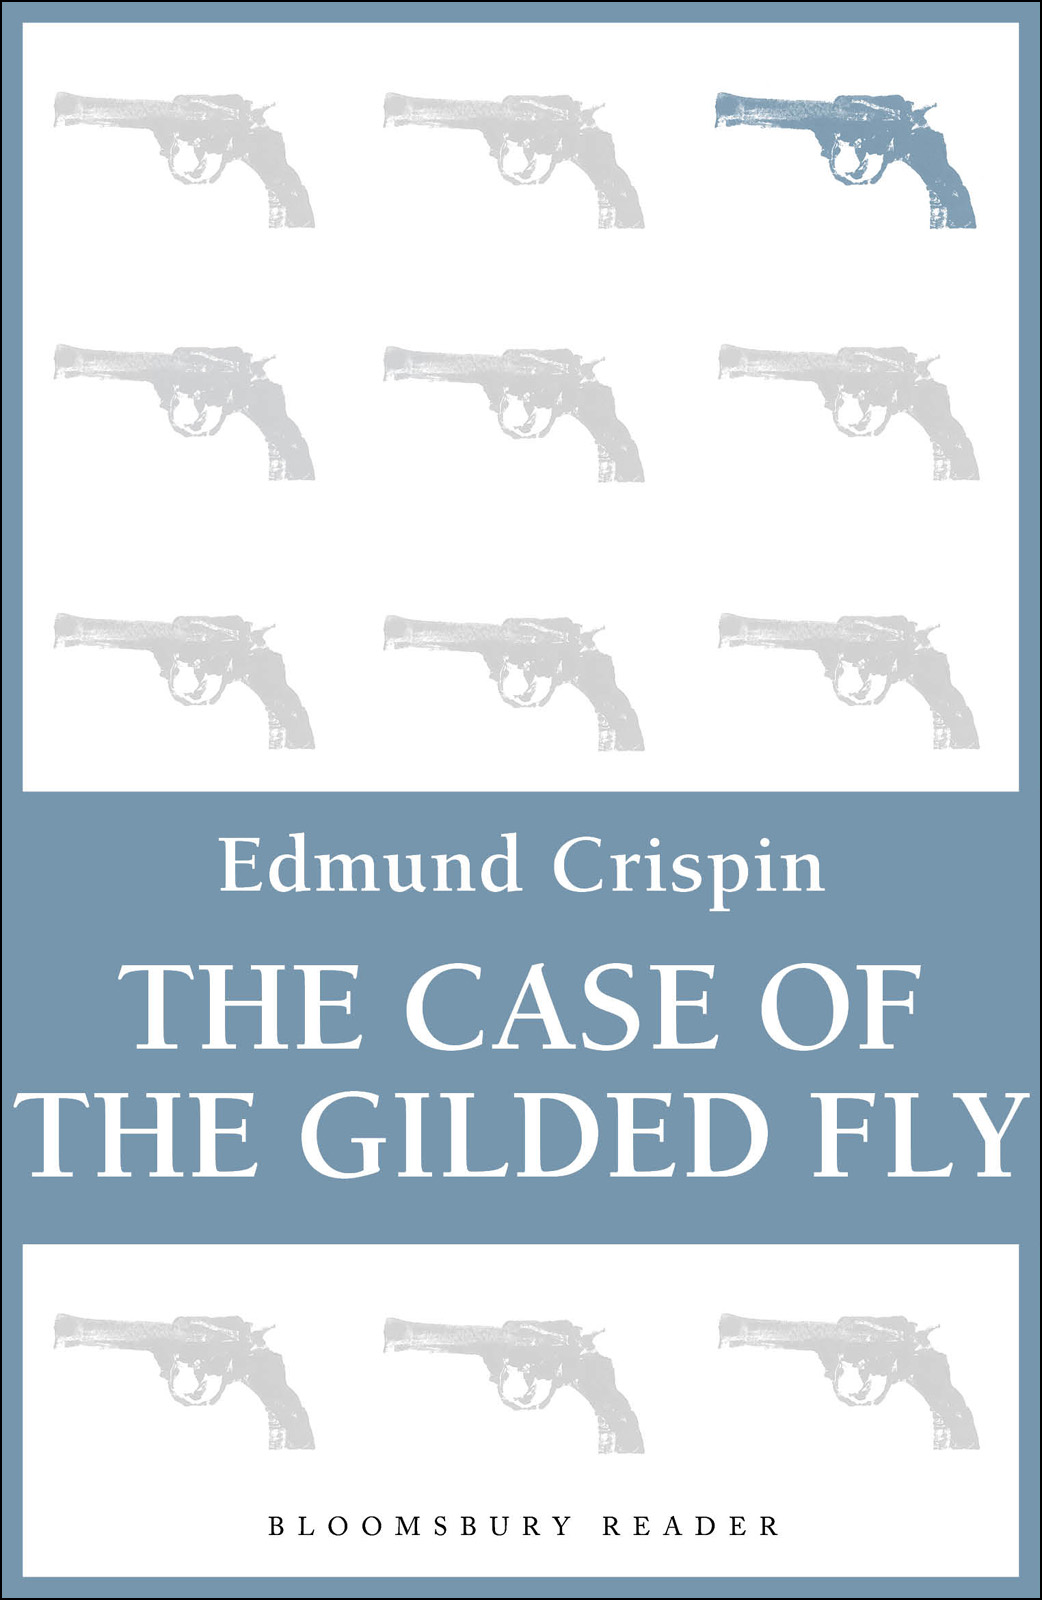 The Case of the Gilded Fly (2009) by Edmund Crispin